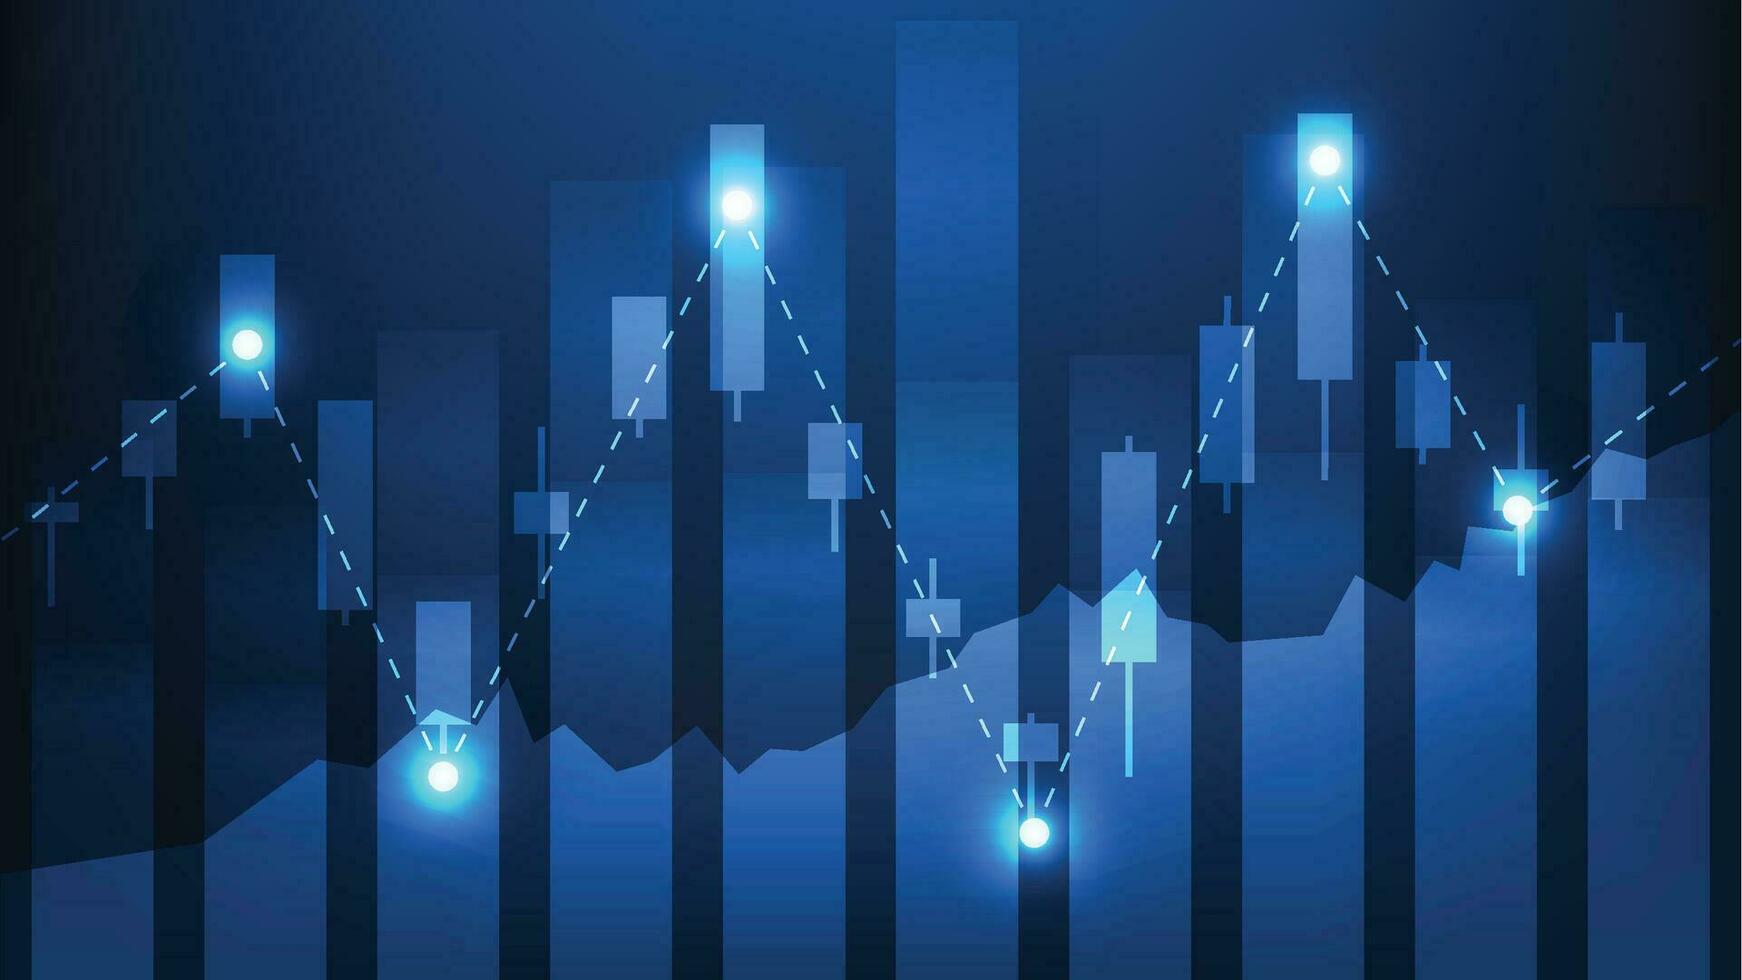 Financial business statistics with bar graph and candlestick chart show stock market price on dark blue background vector